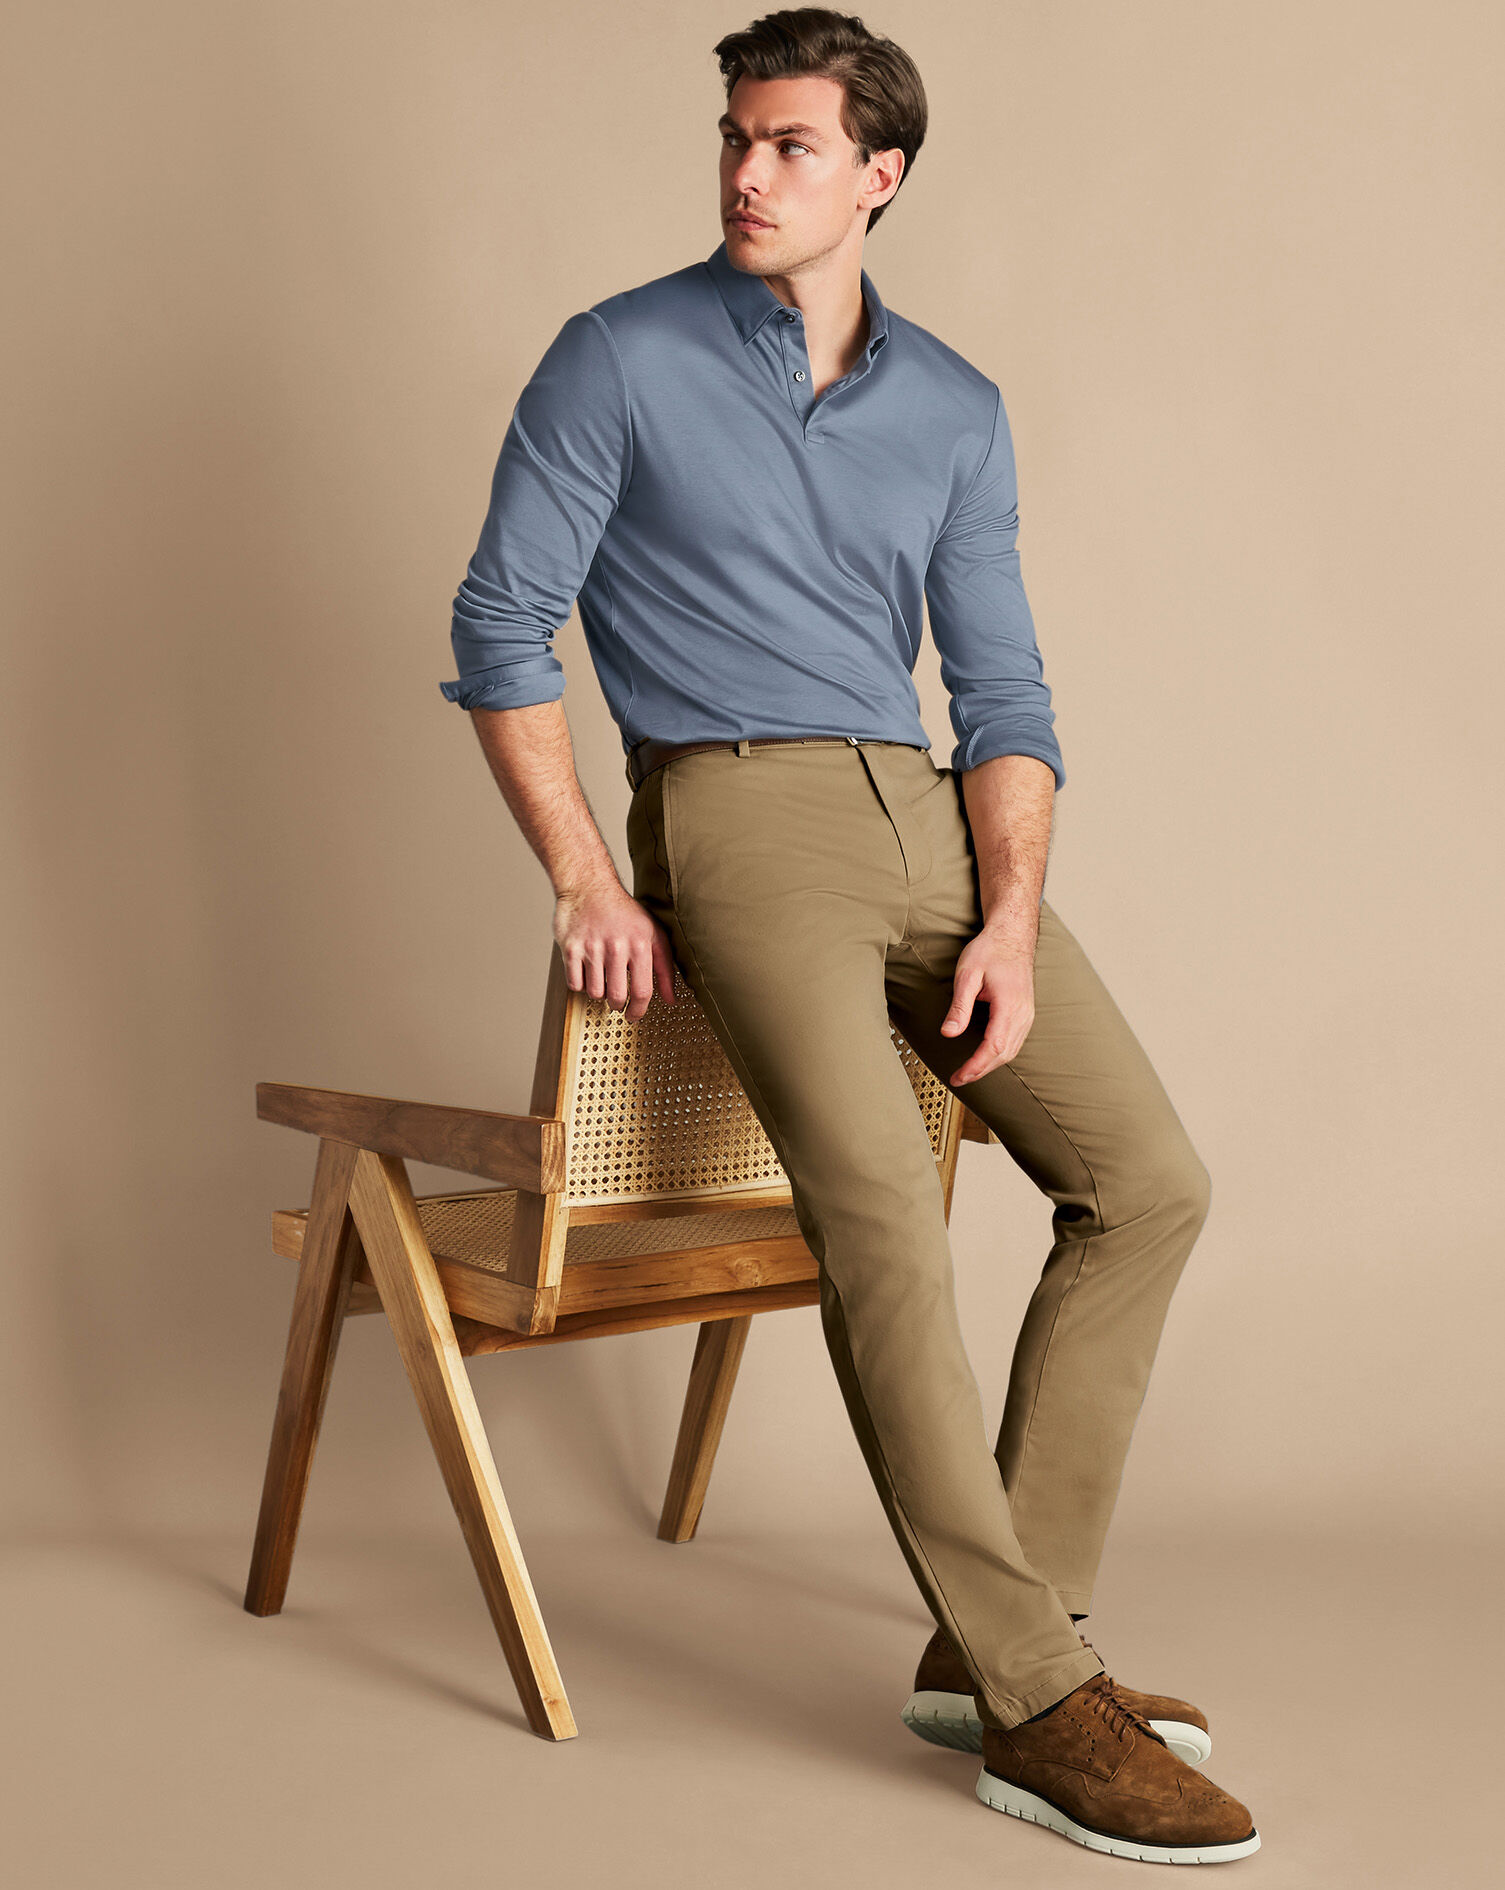 Mens Chino Trousers UK | Navy & Tan Chinos - Rydale